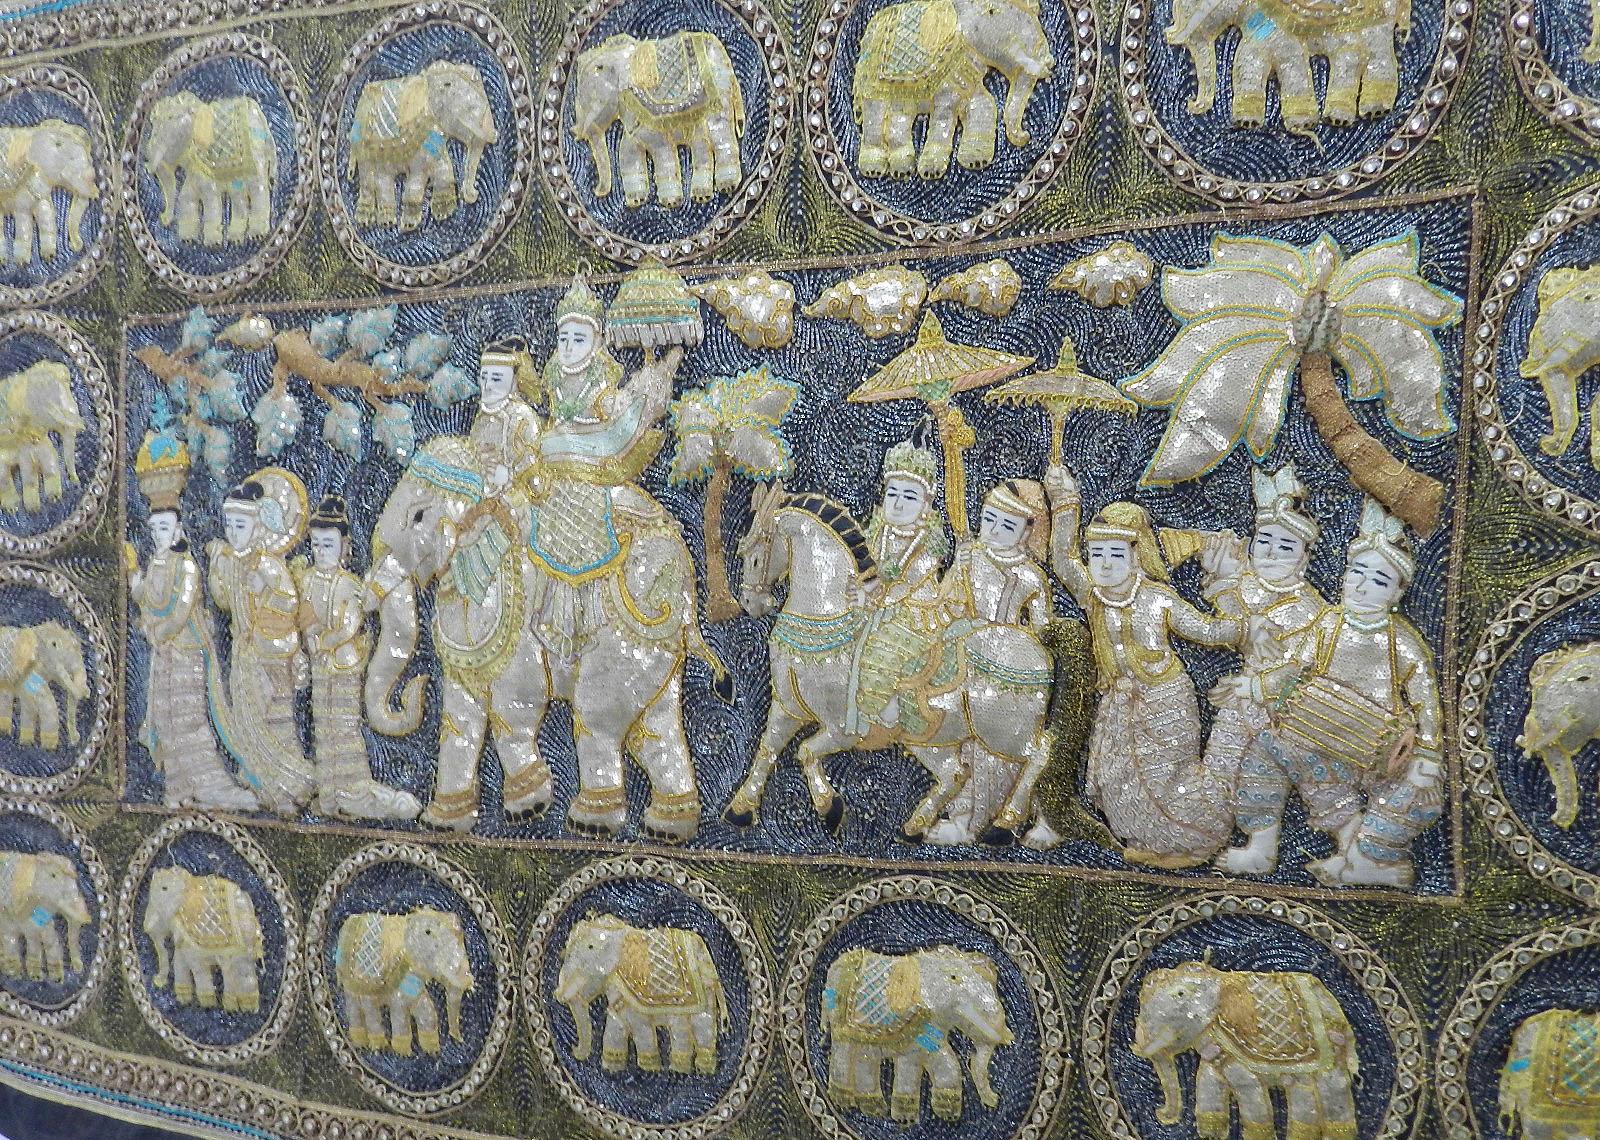 Wall hanging large Indian embroidered vintage needlework tapestry, circa 1970
Depicts an Indian procession with elephants, horse and people
Good quality 1970s needlework.
Handmade in India
Applique and padded quilting to figures and